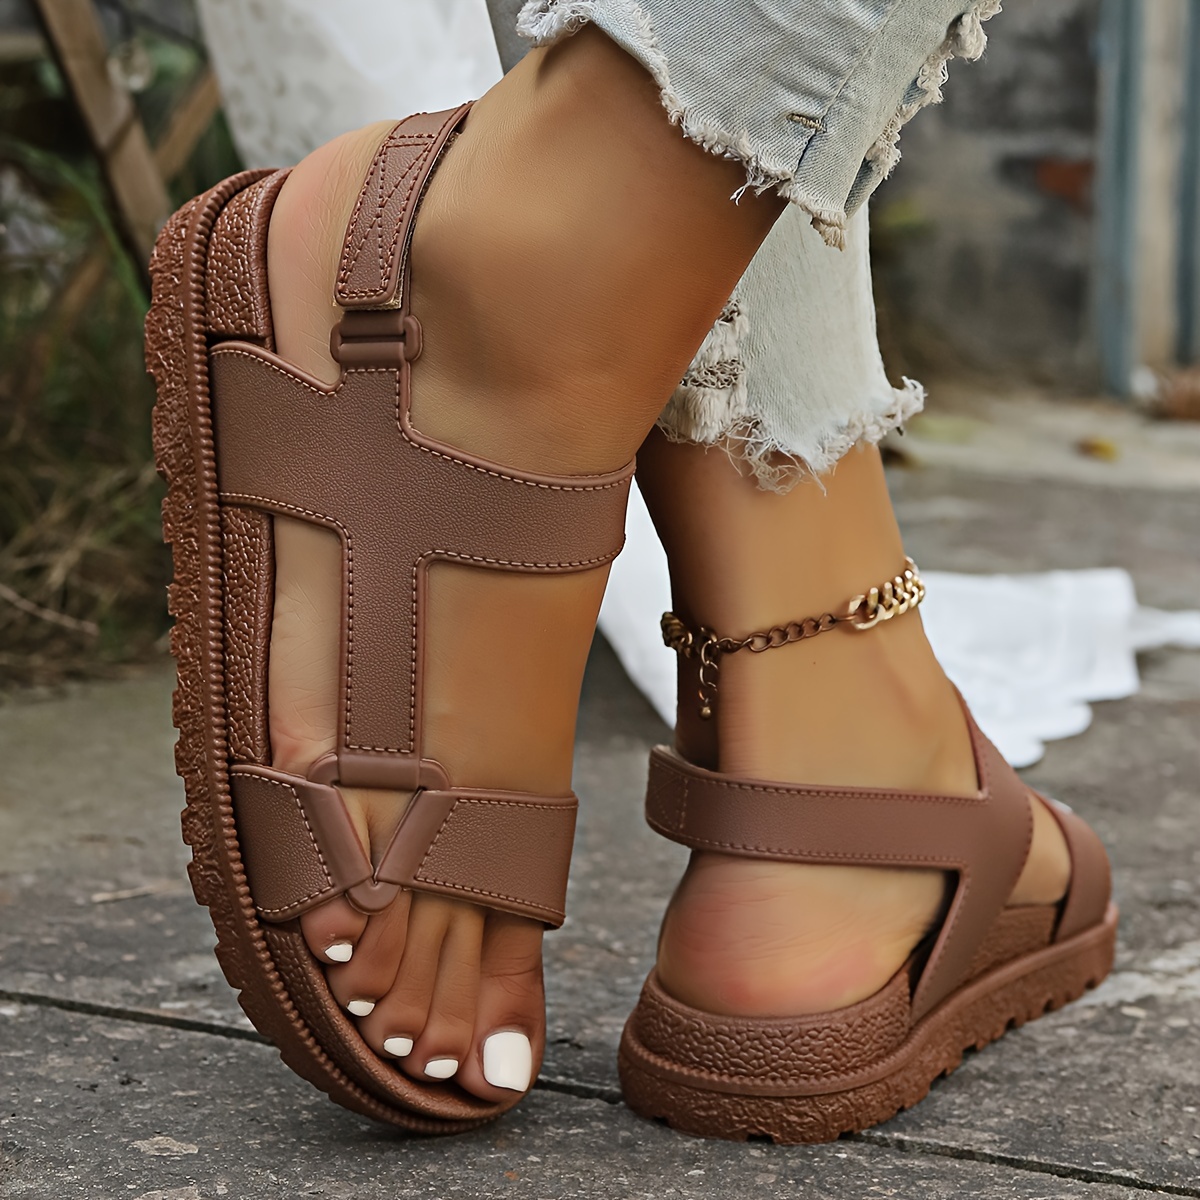 

Women's Summer Flat Sandals, Solid Color Open Toe Eva Shoes, Casual Outdoor Beach Soft Sole Sandals